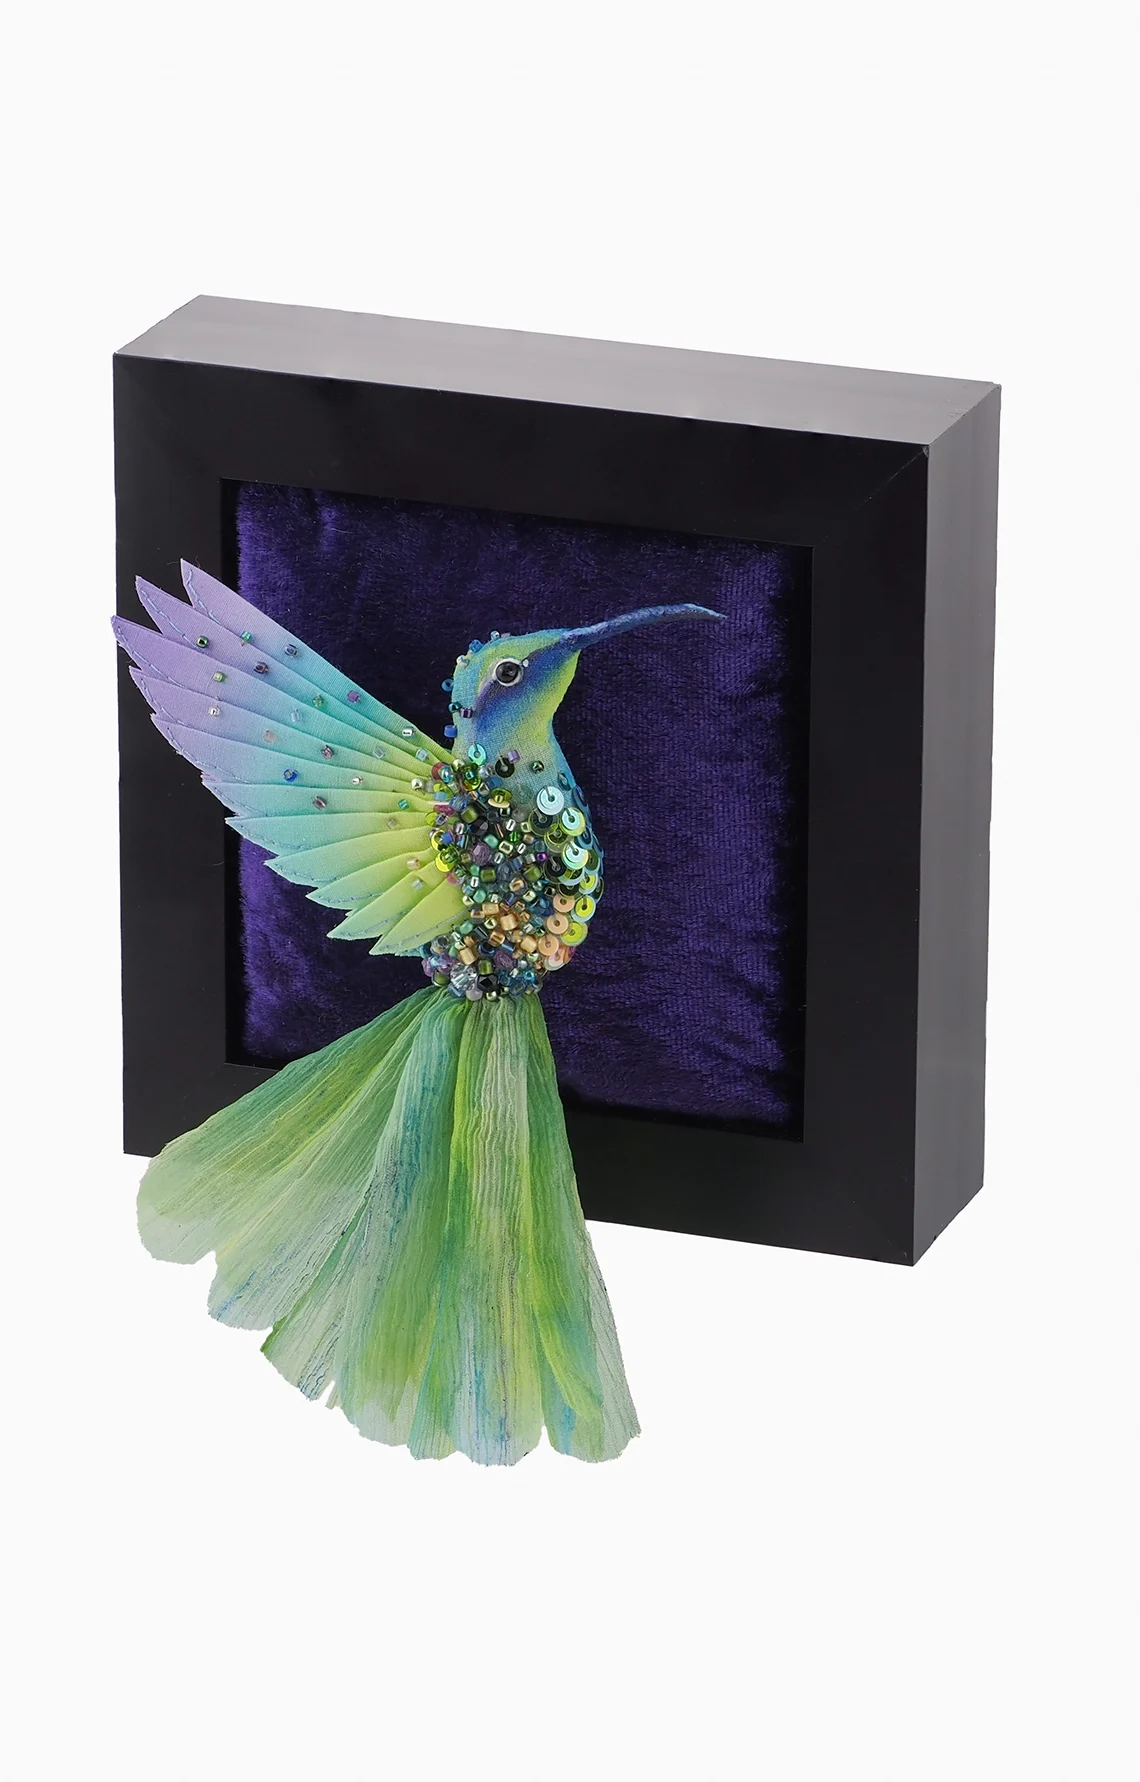 Flying Hummingbird Textile Wall Panel and Brooch Pin | Green, Blue and Purple - handcrafted hummingbird art